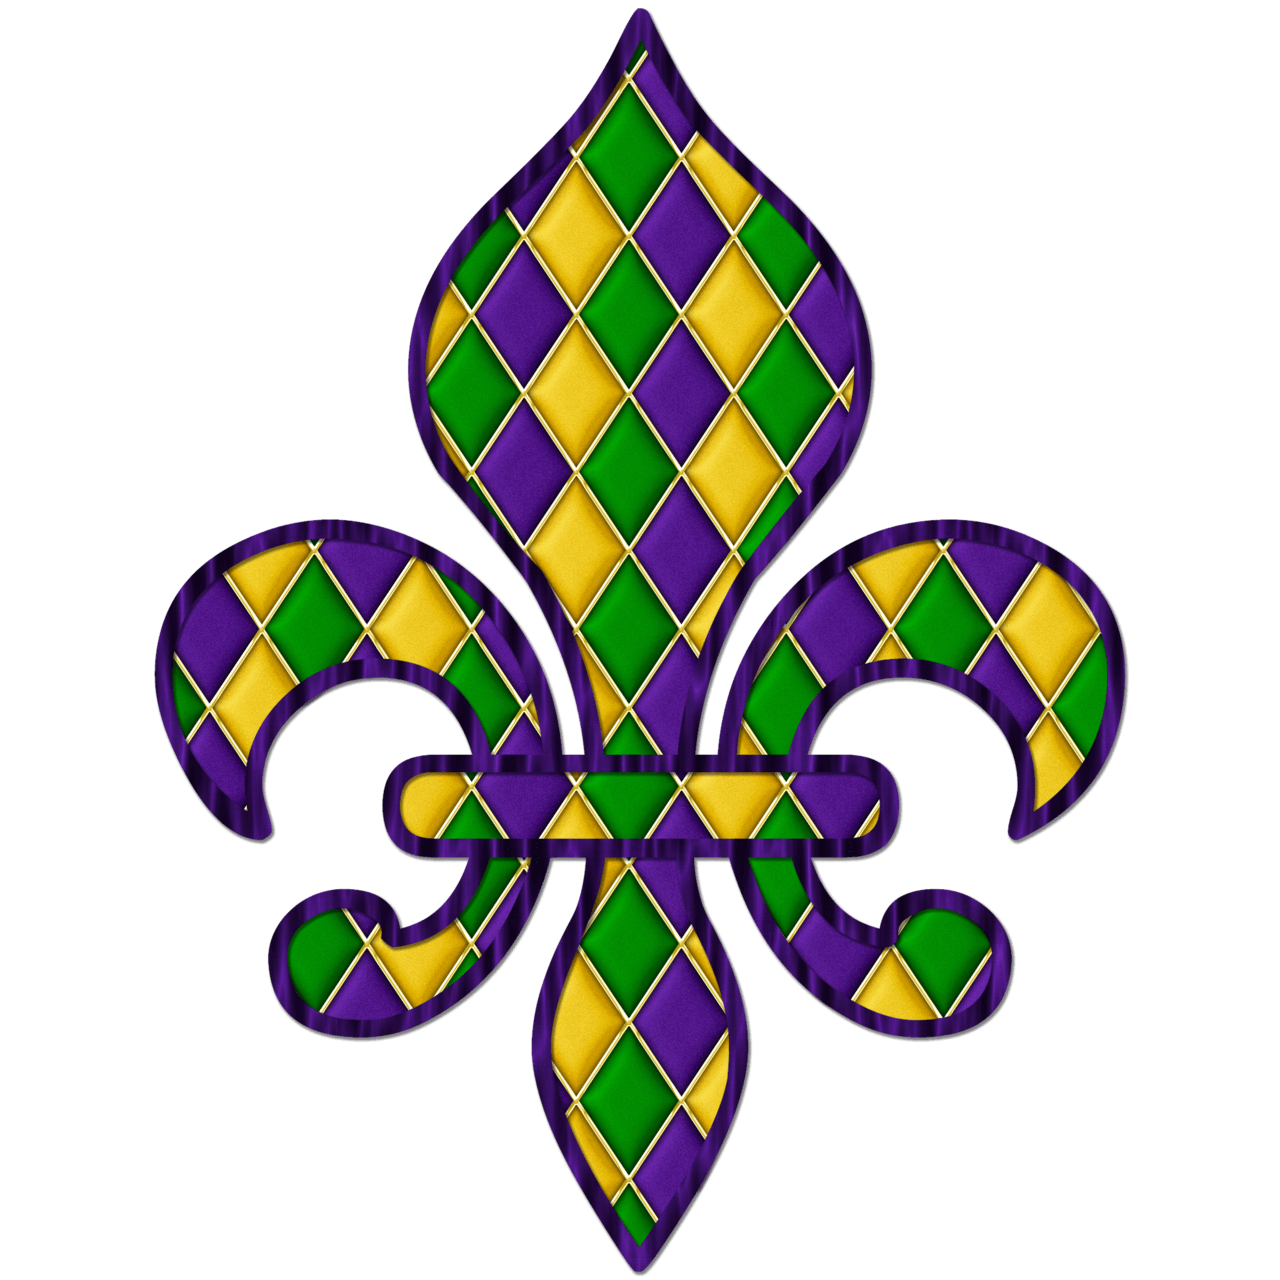 https://clipground.com/images/happy-mardi-gras-clipart-18.png